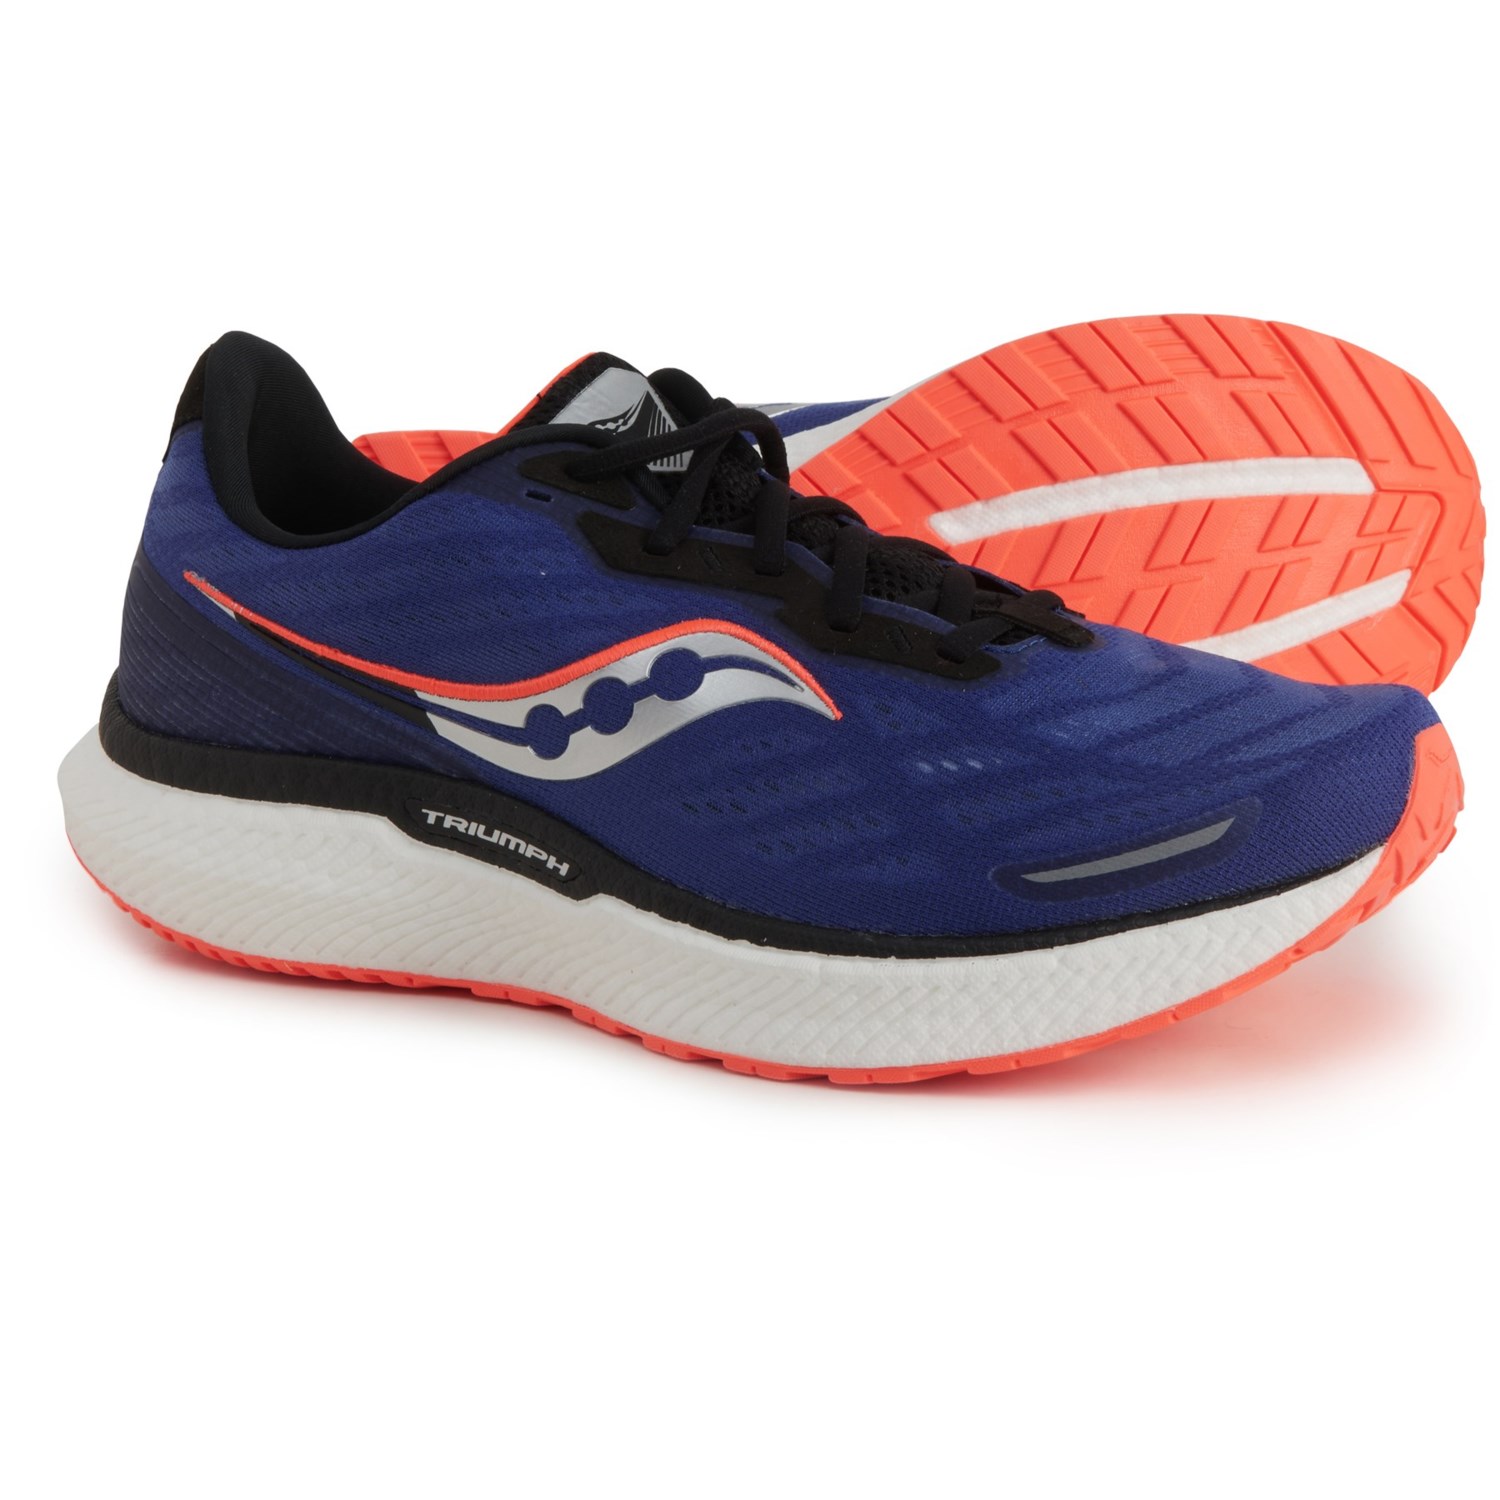 Saucony Triumph 19 Running Shoes (For Men) - Save 50%